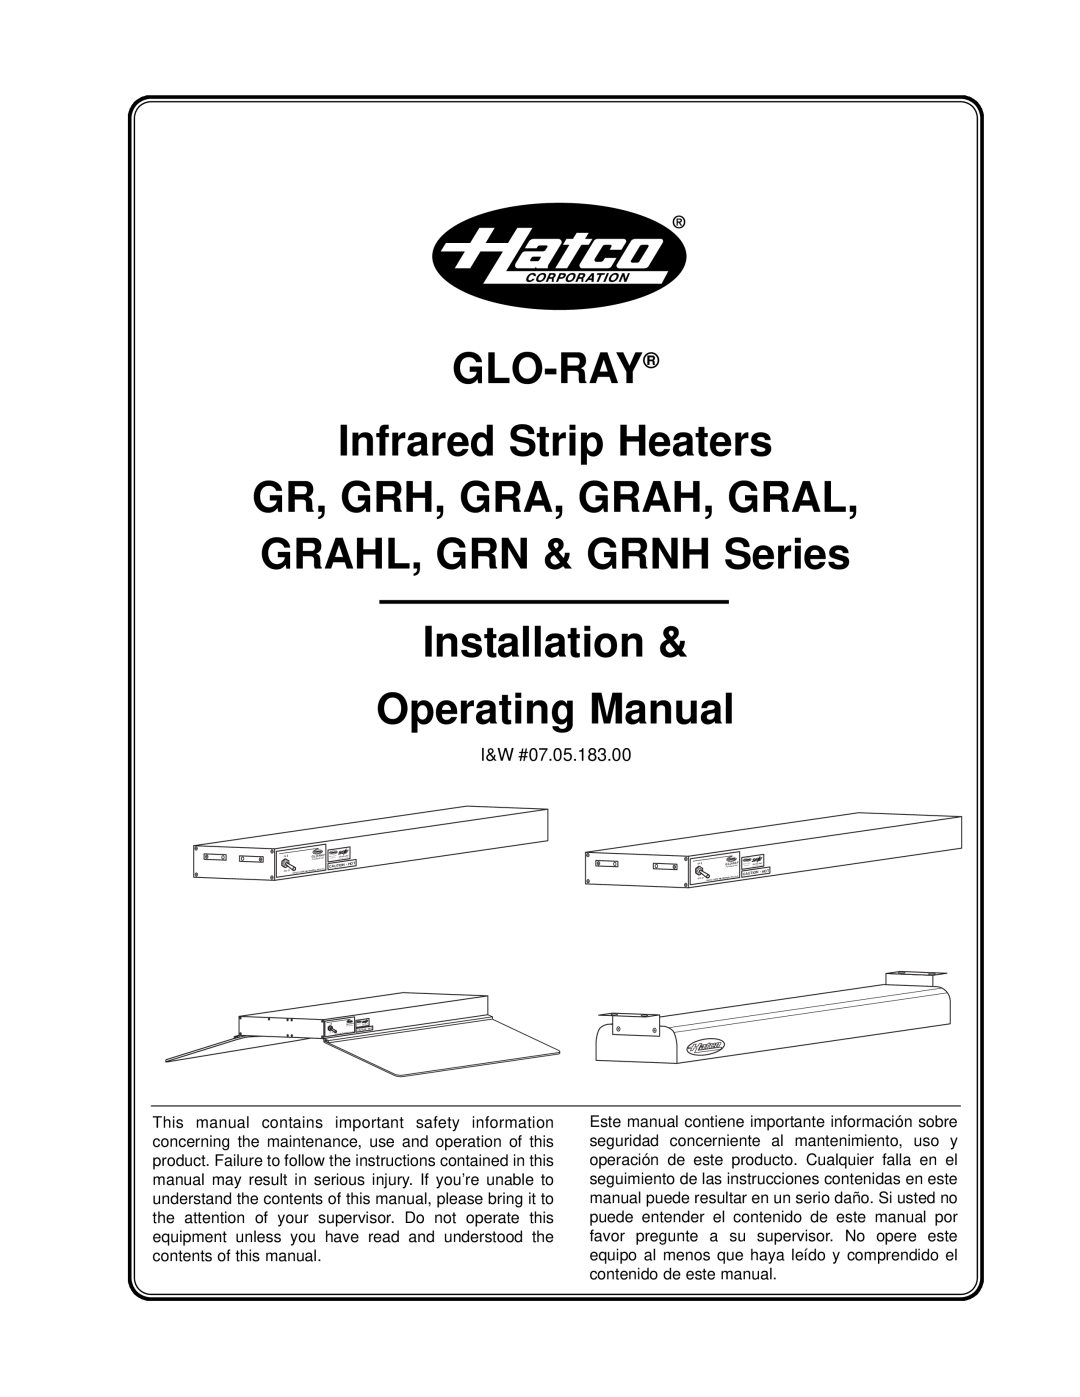 Hatco GRAHL, GRNH manual GLO-RAY Infrared Strip Heaters GR, GRH, GRA, GRAH, GRAL, I&W #07.05.183.00 